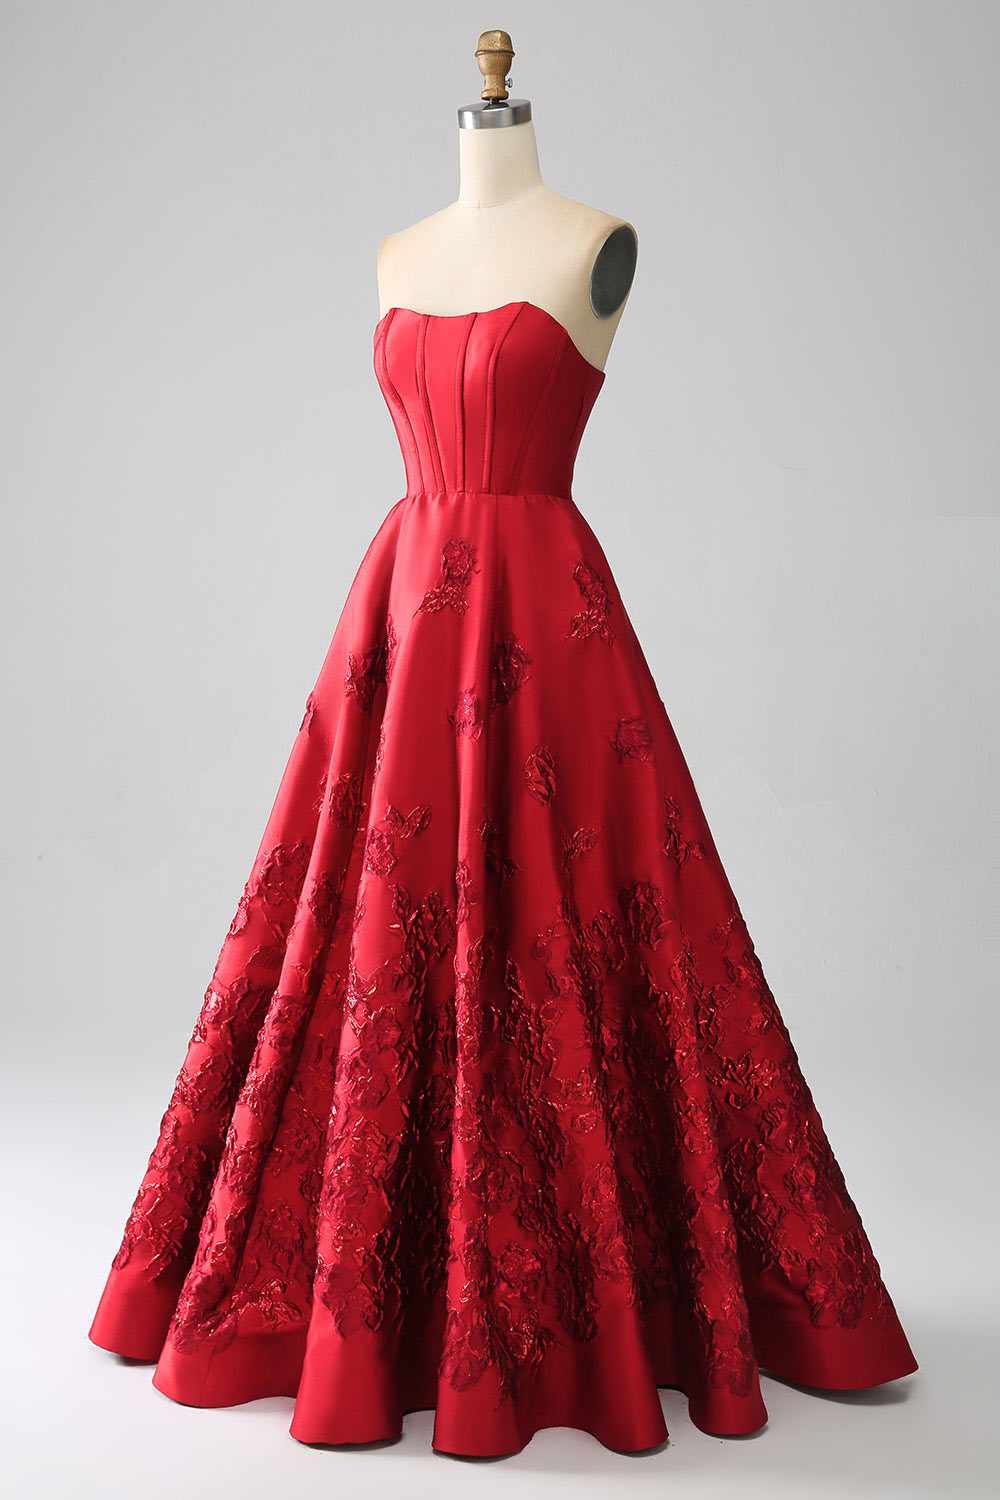 Strapless floral embroidery prom dress, dark red evening gown, custom party dress